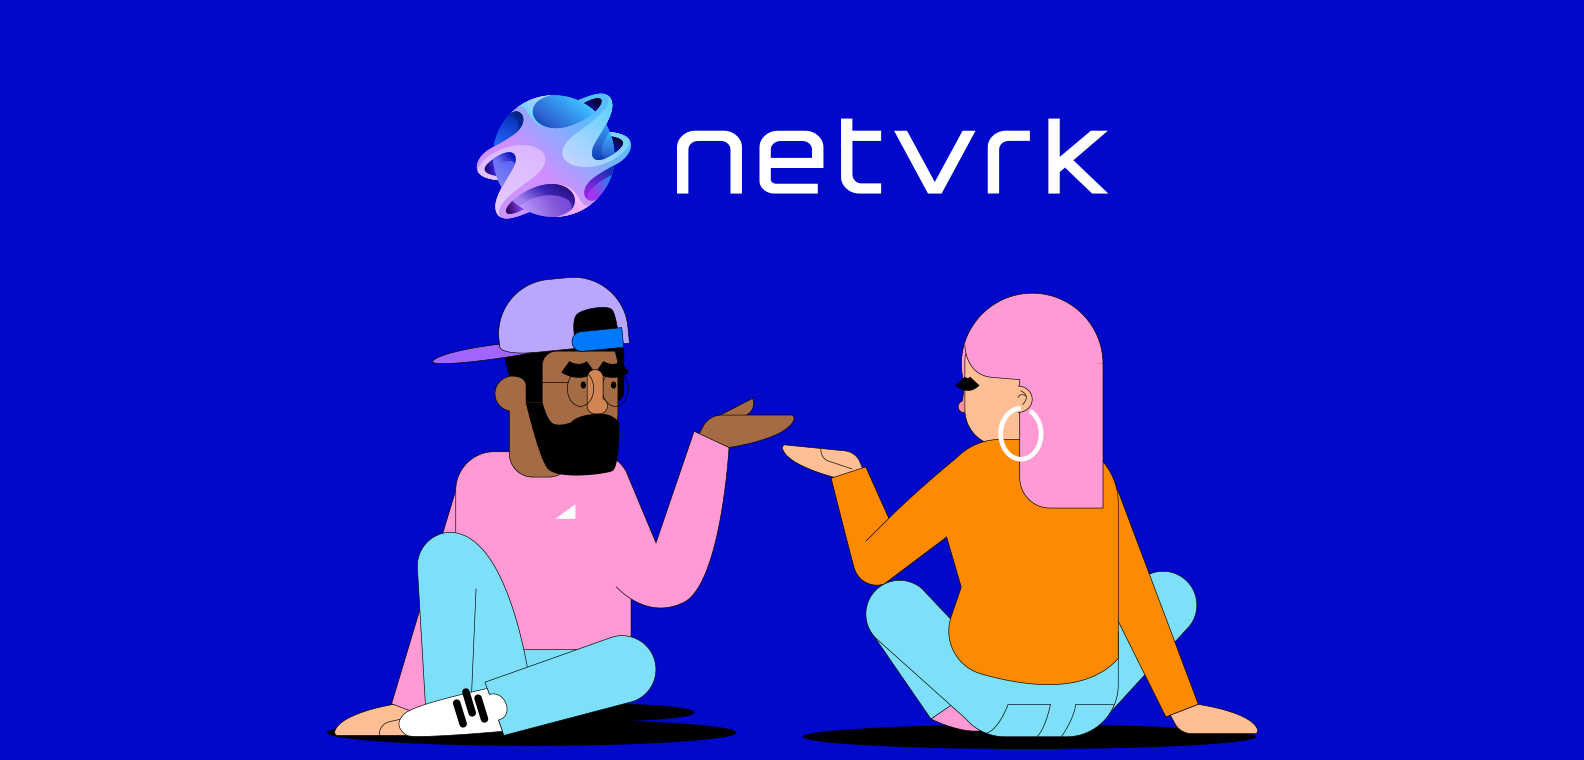 Creating An Ever-Expanding Digital Metaverse With Netvrk